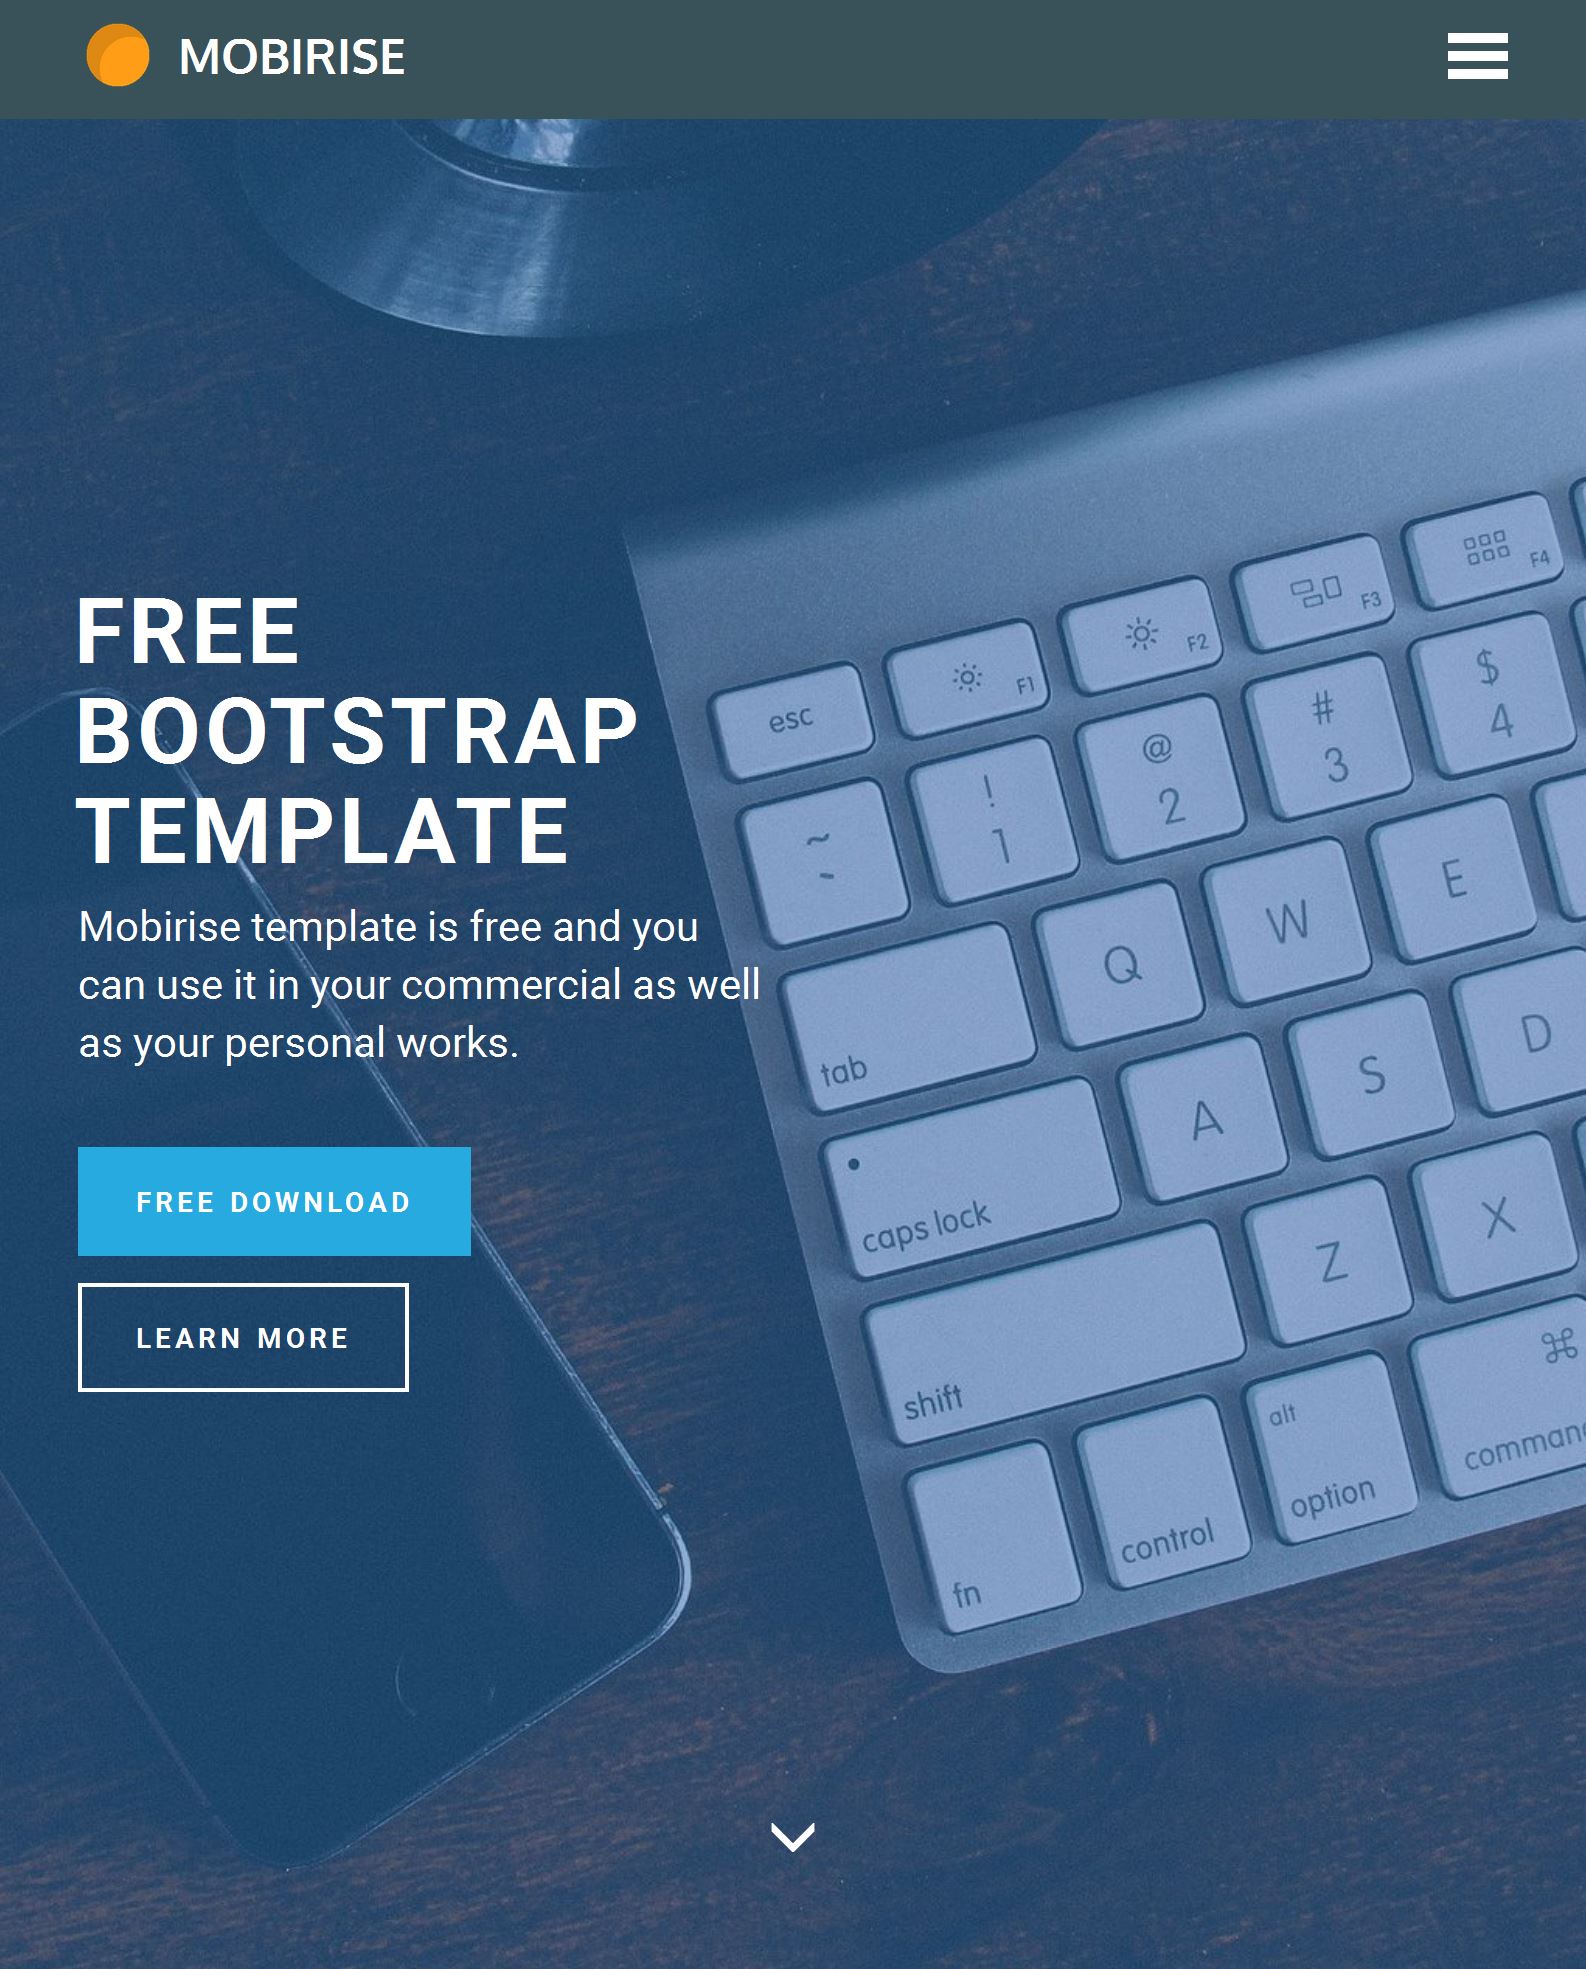 Mobile Bootstrap Template